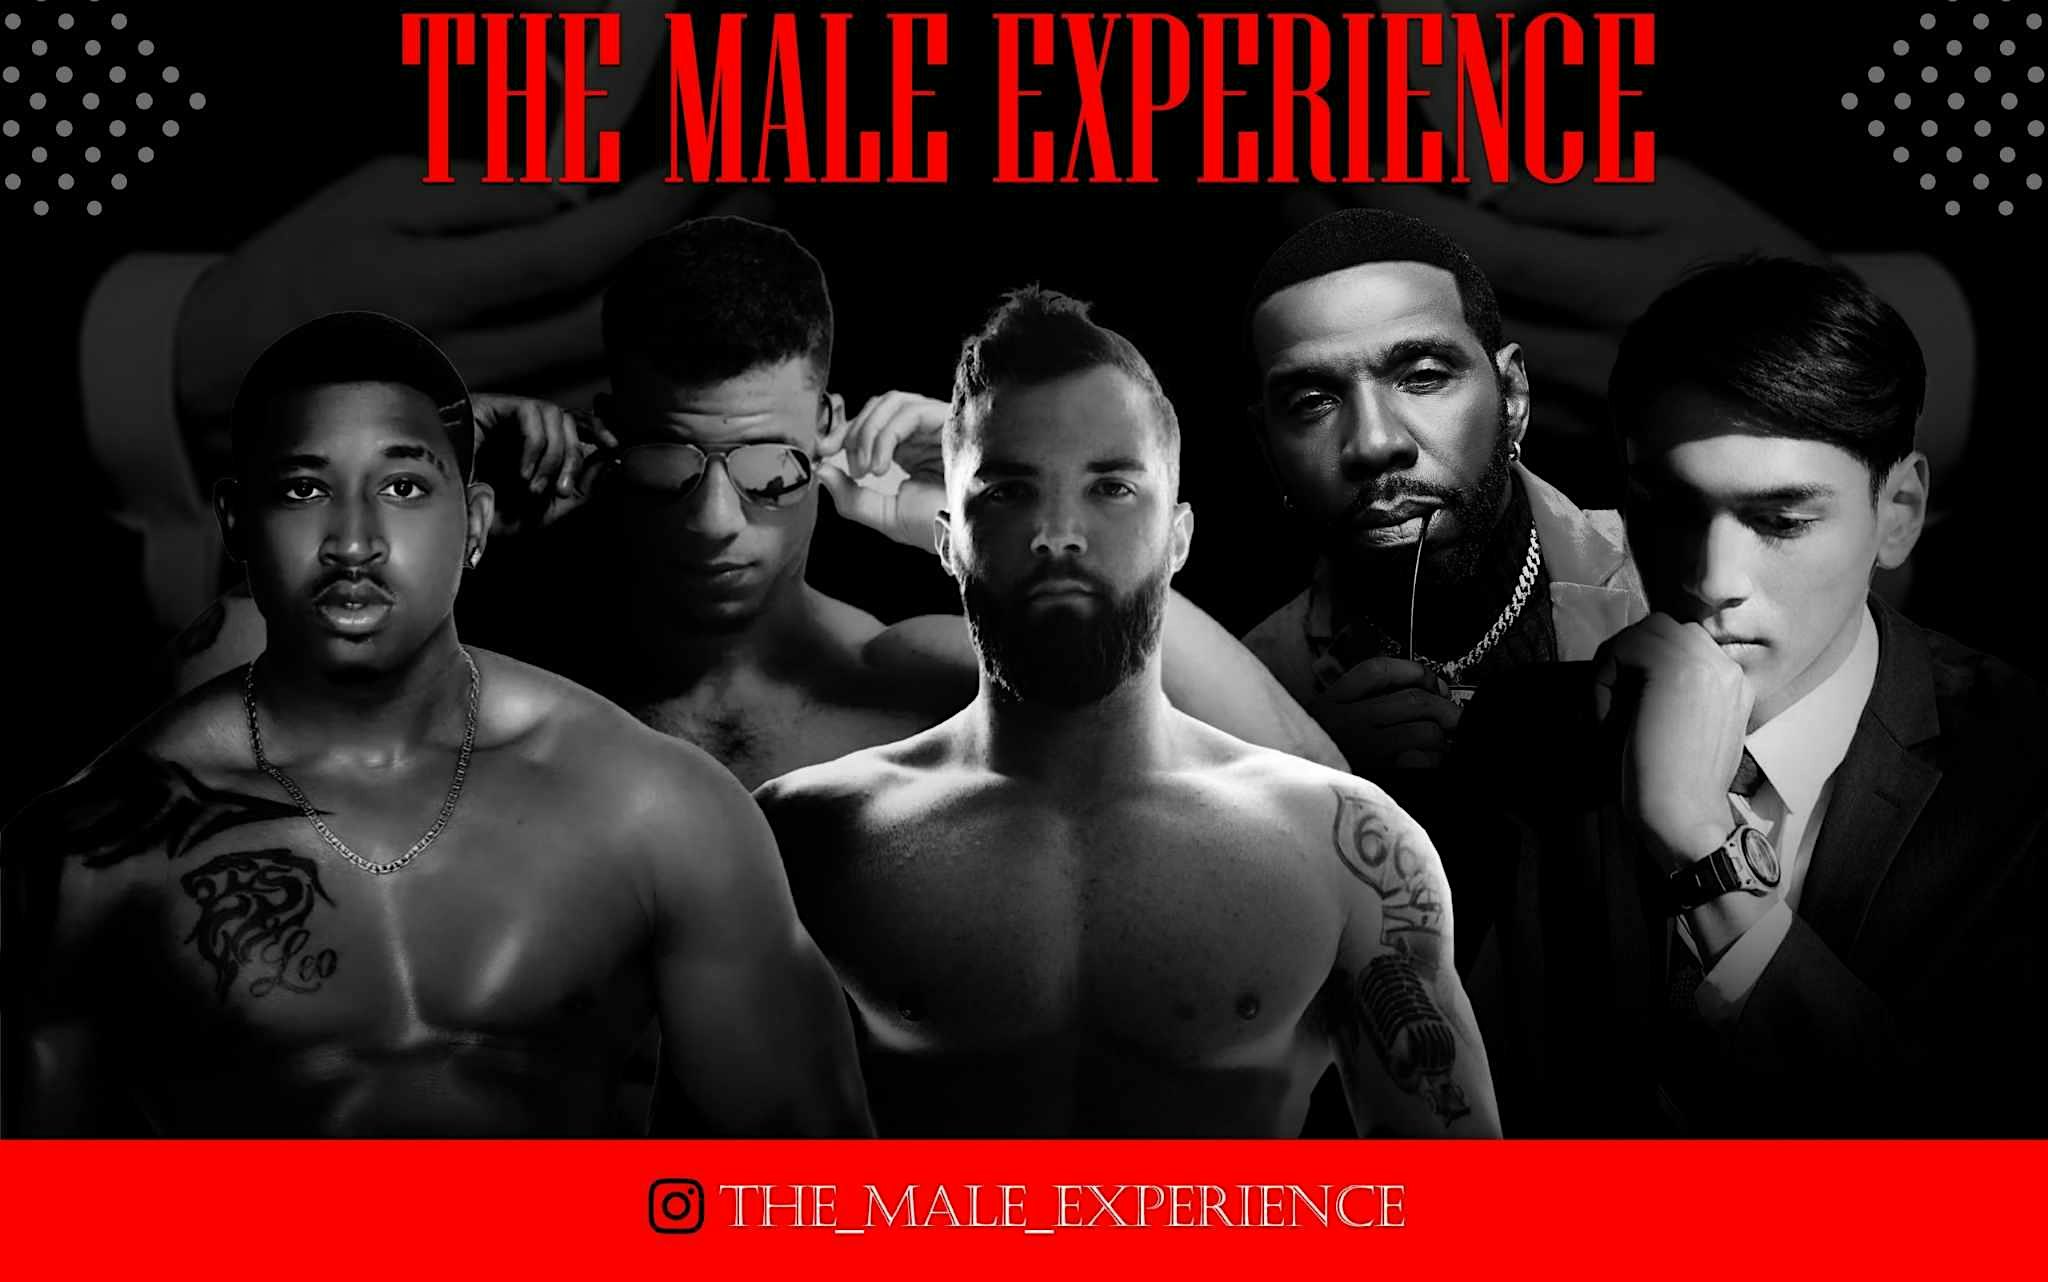 The Male Experience Exclusive VIP Package